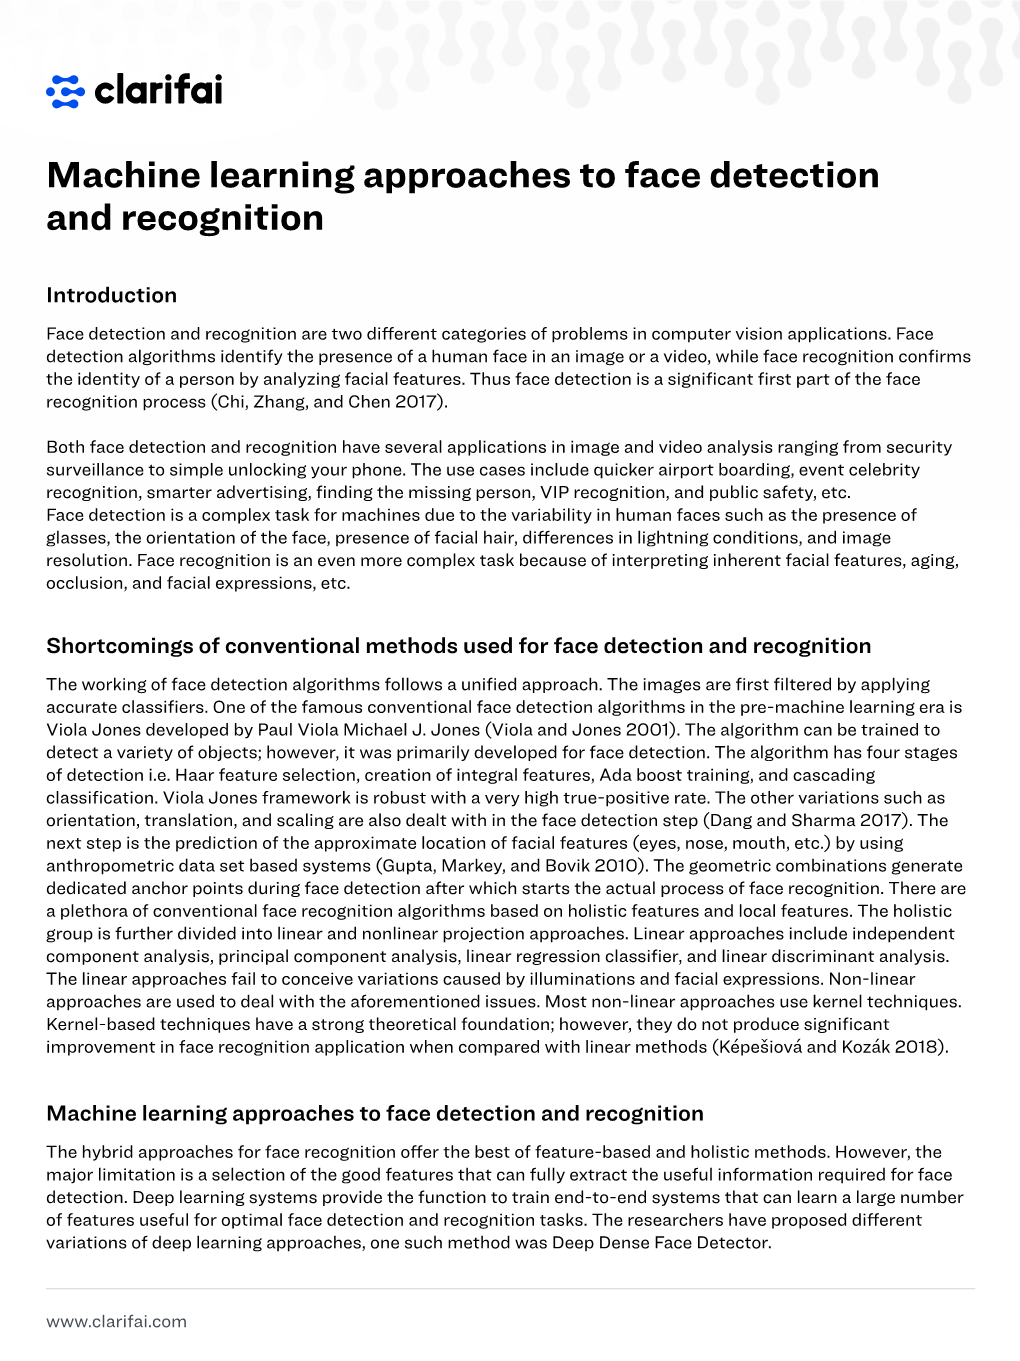 Machine Learning Approaches to Face Detection and Recognition